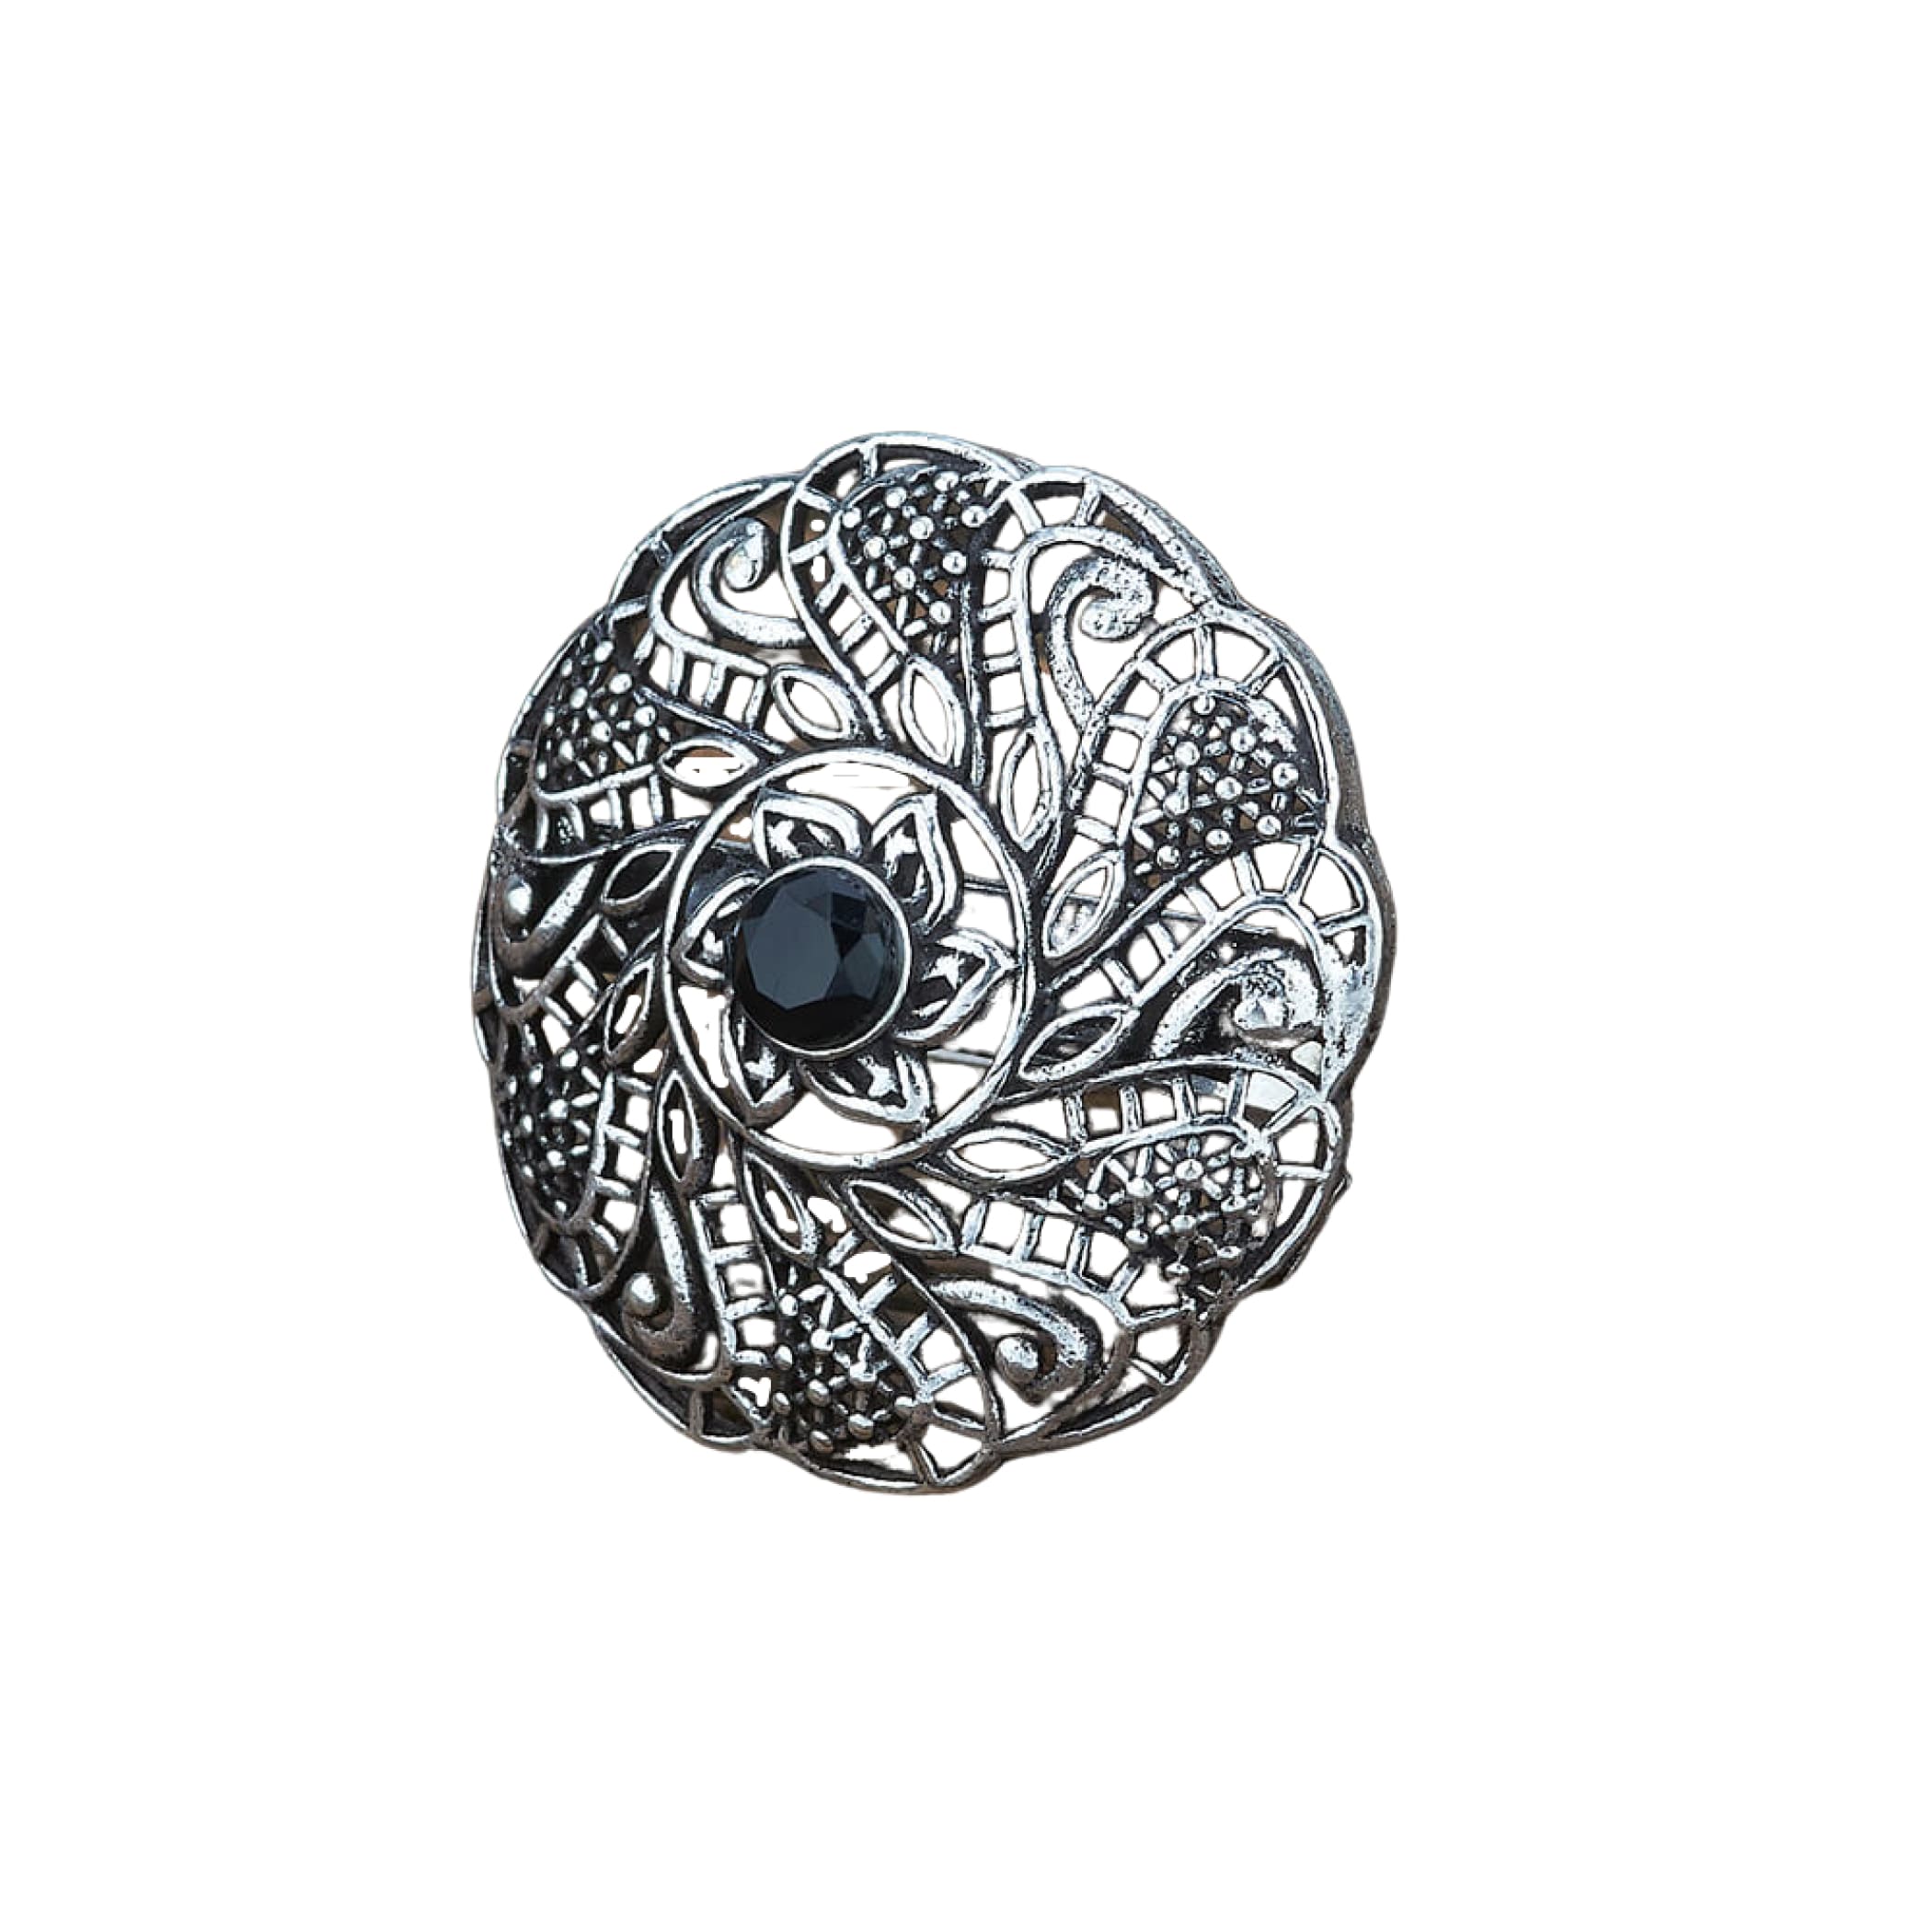 Classic ring with oxidised plating women rings jewelry